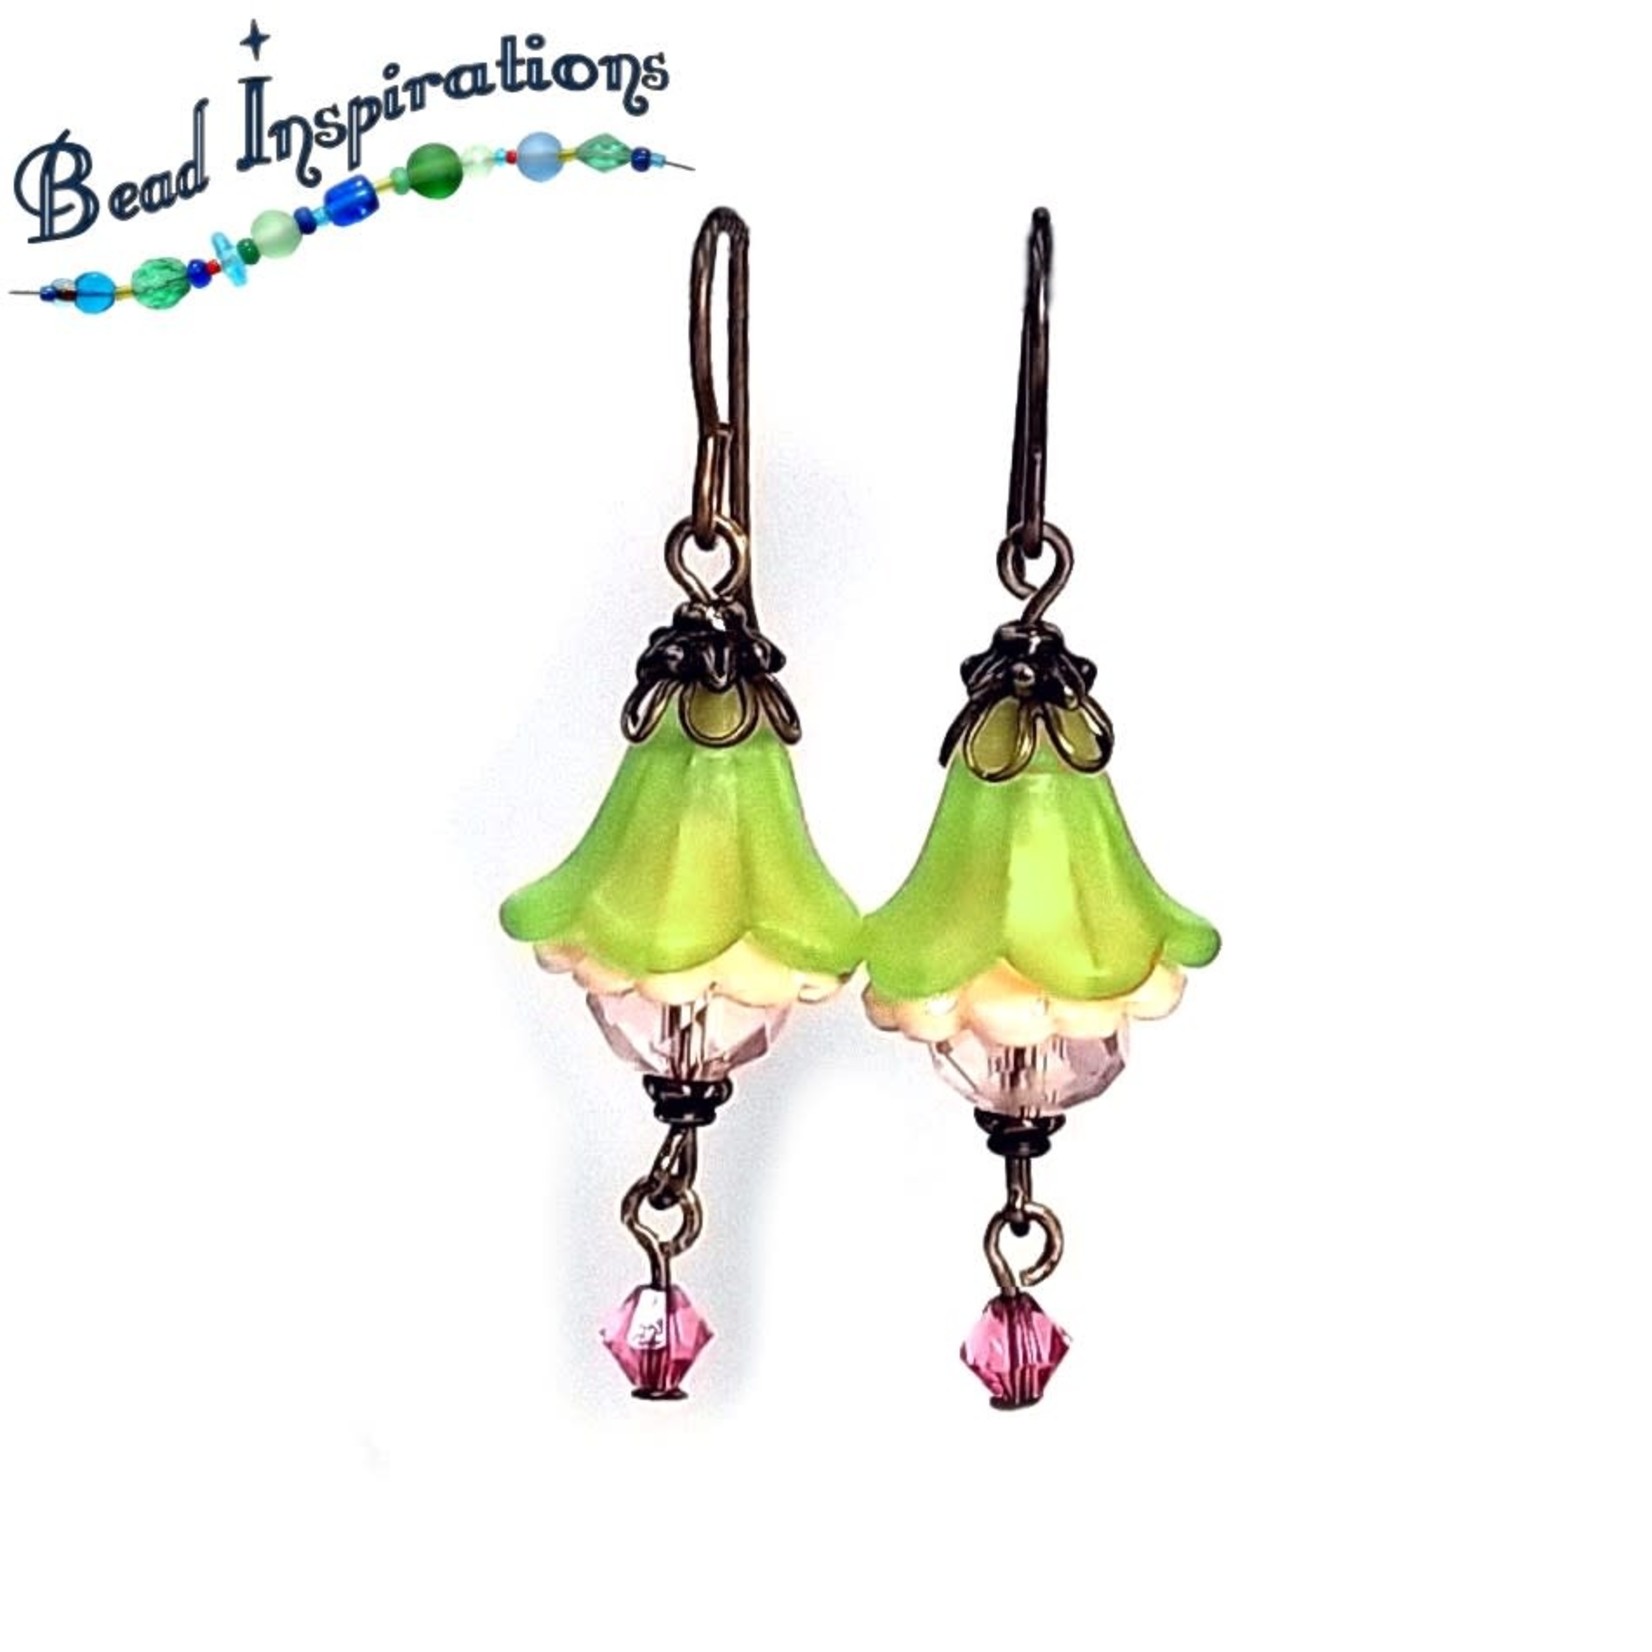 Bead Inspirations Lucy Spring Earrings